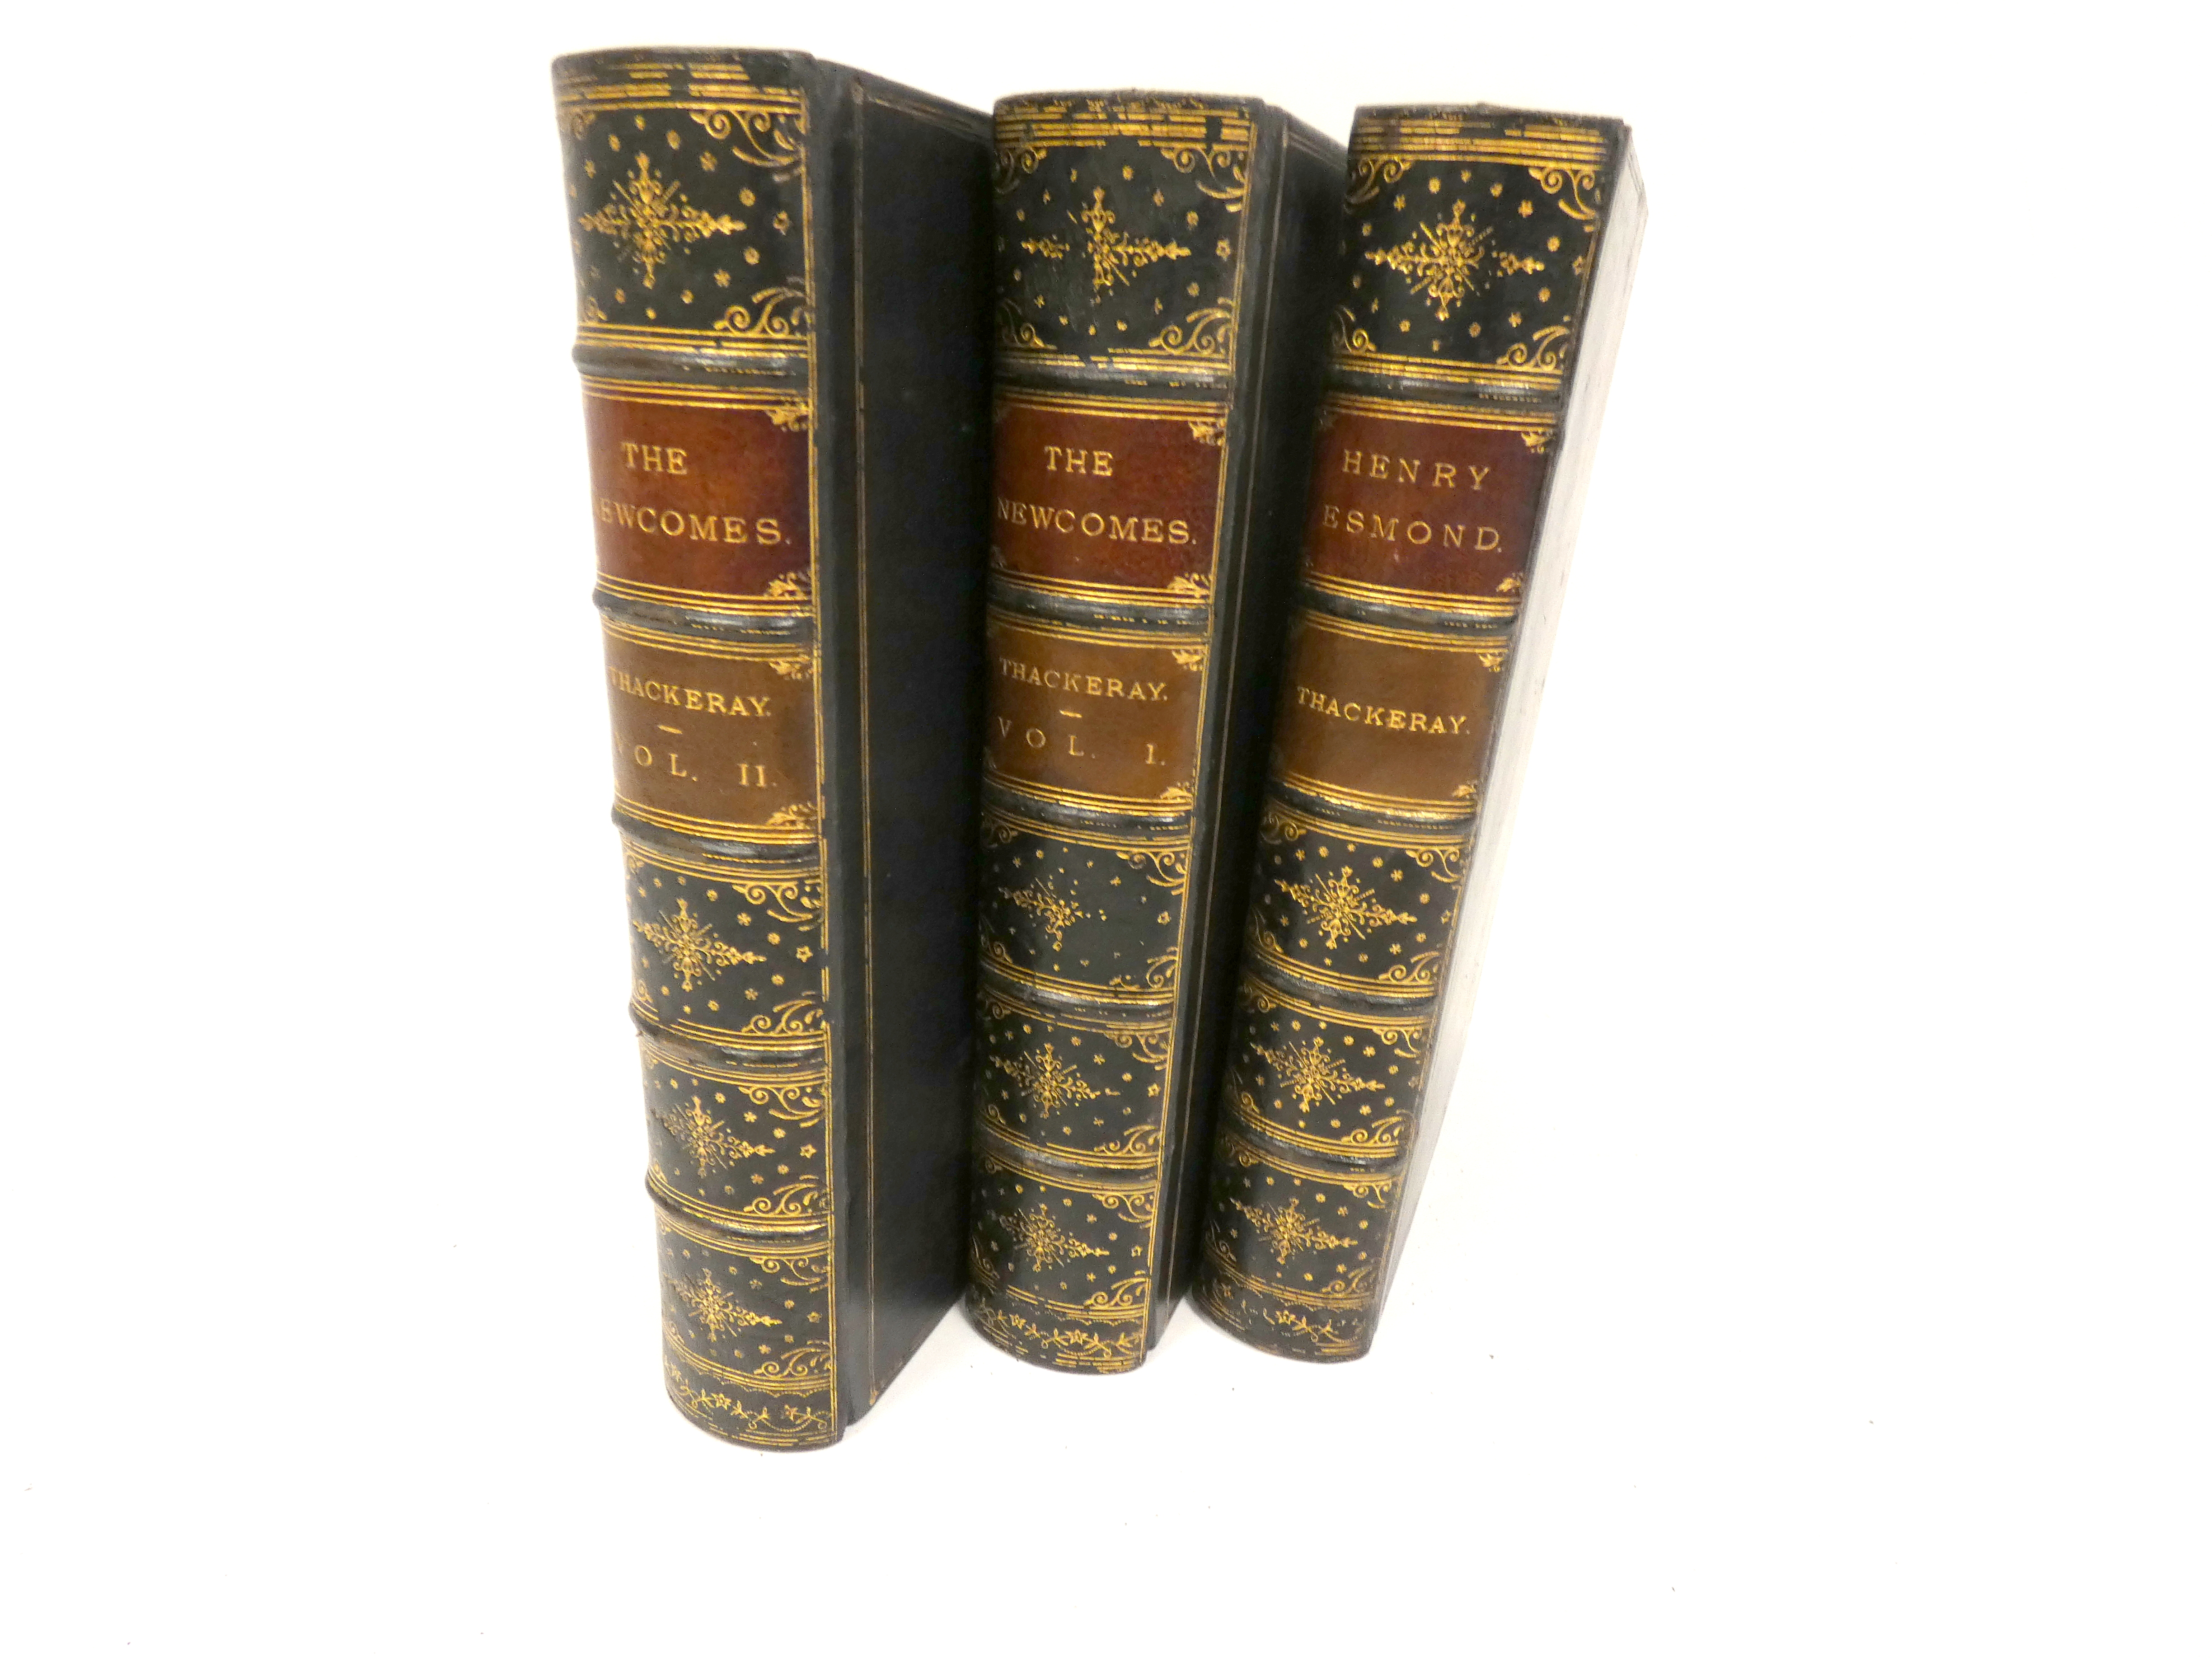 THACKERAY W. M.  The Newcomes & The History of Henry Esmond. 3 vols. Illus. Nice copies in dark calf - Image 3 of 3